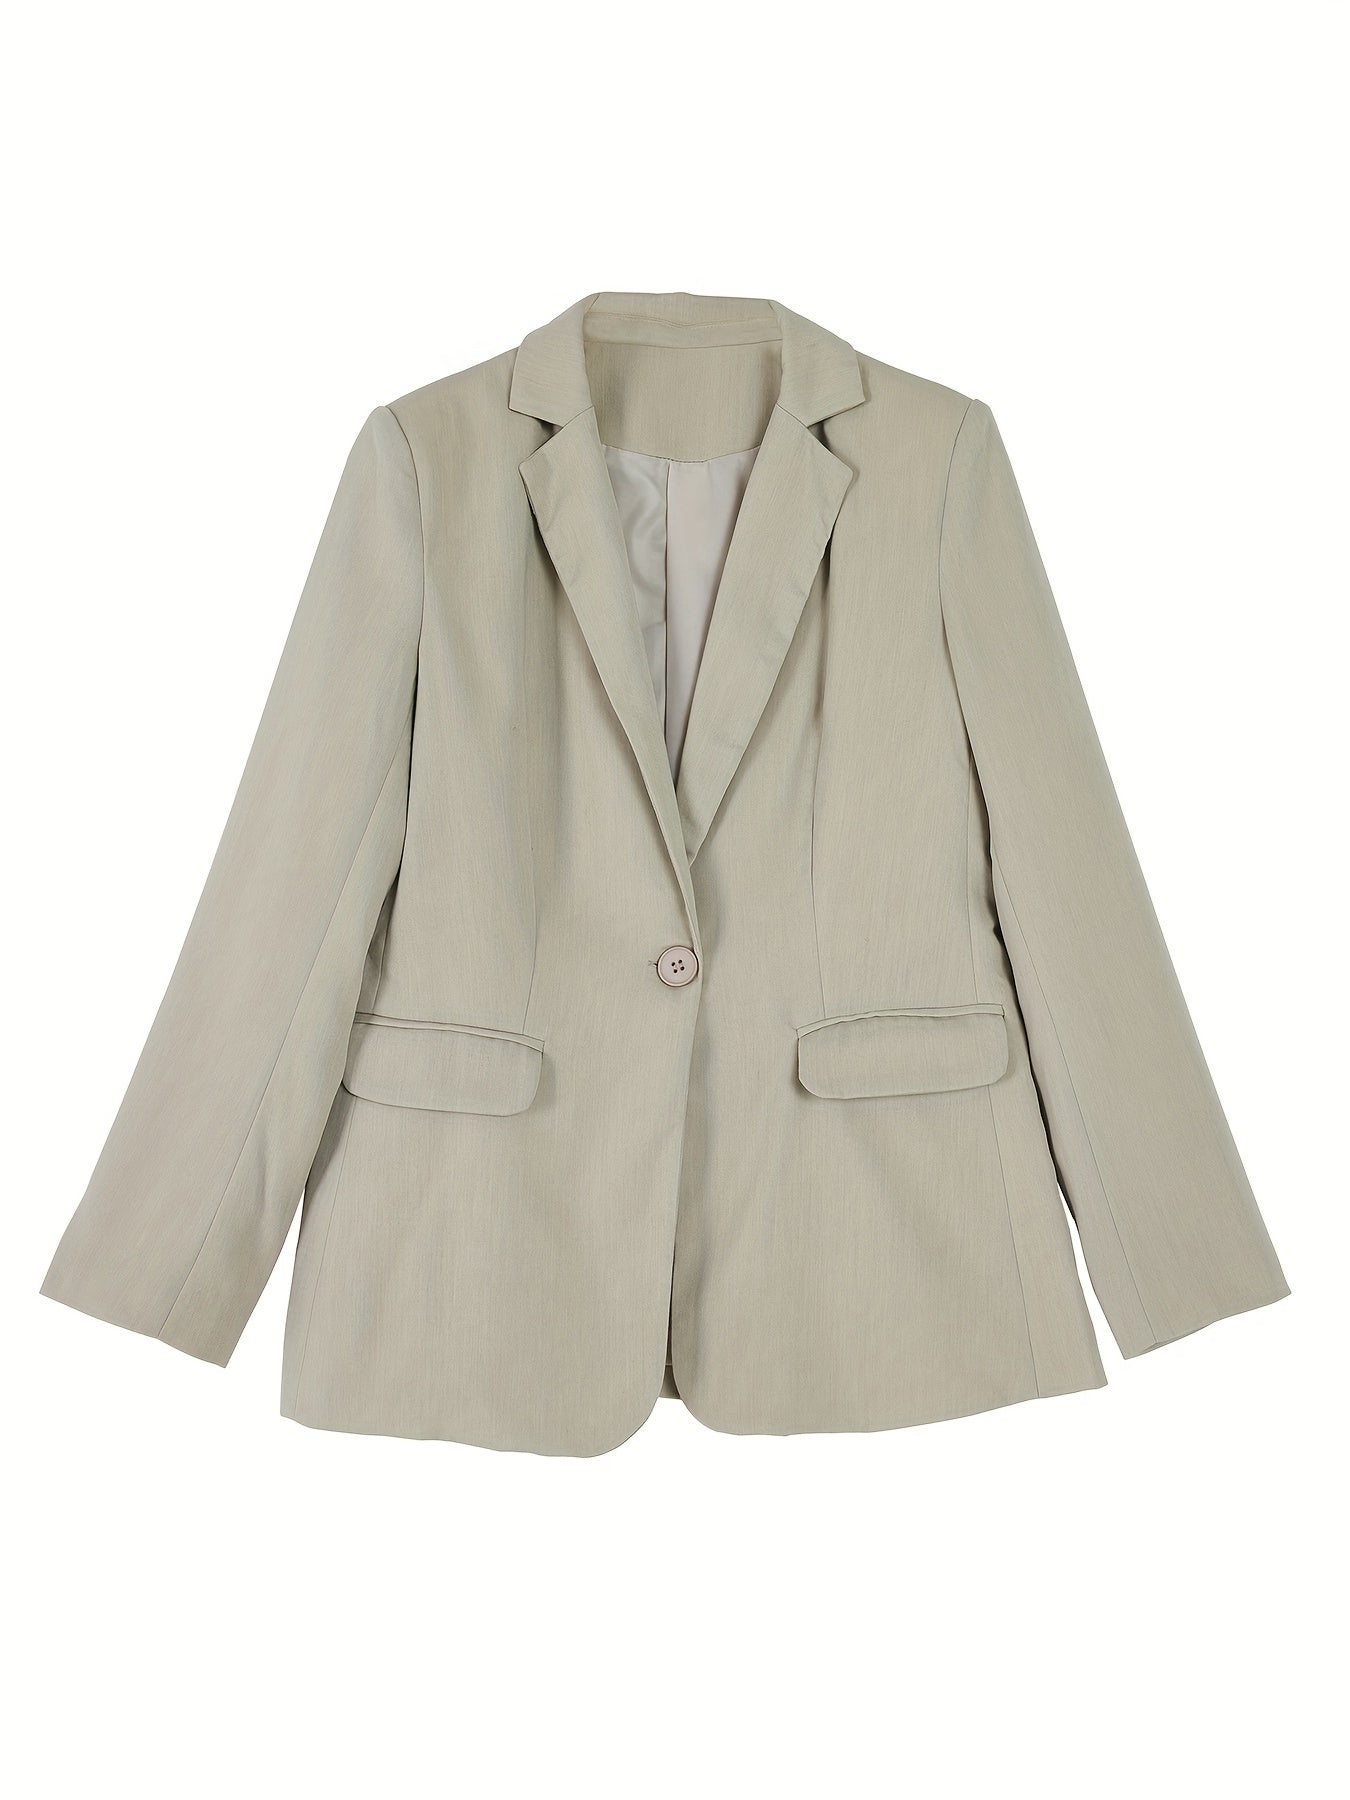 「binfenxie」Solid Lapel Blazer Jacket, Casual Long Sleeve Work Office Outerwear With Pockets, Women's Clothing